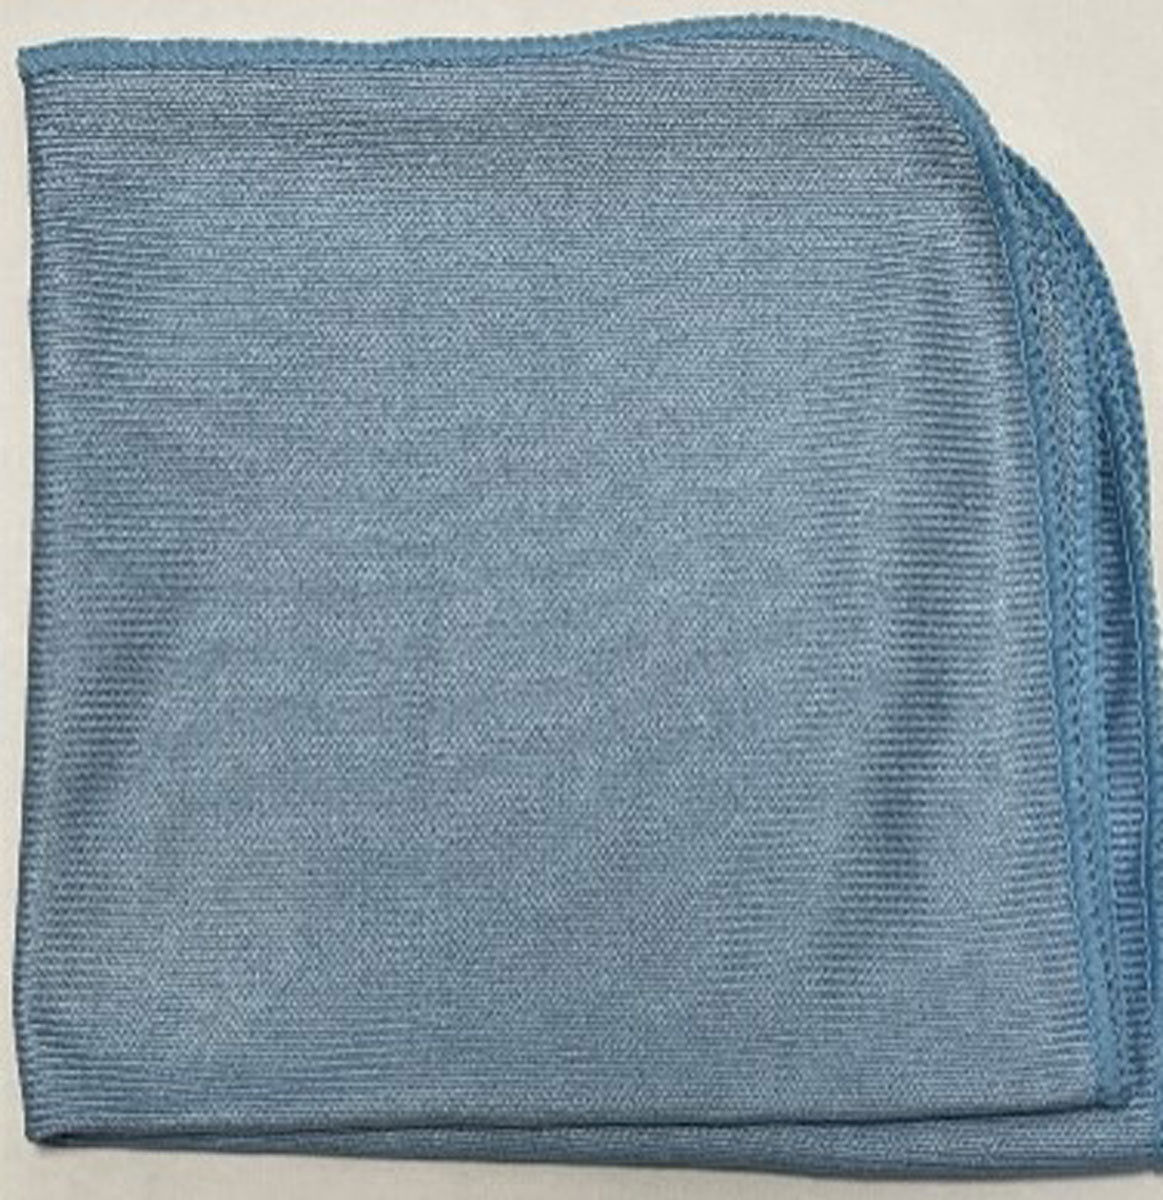 What makes this microfiber cleaning cloth ideal for glasses and windows?